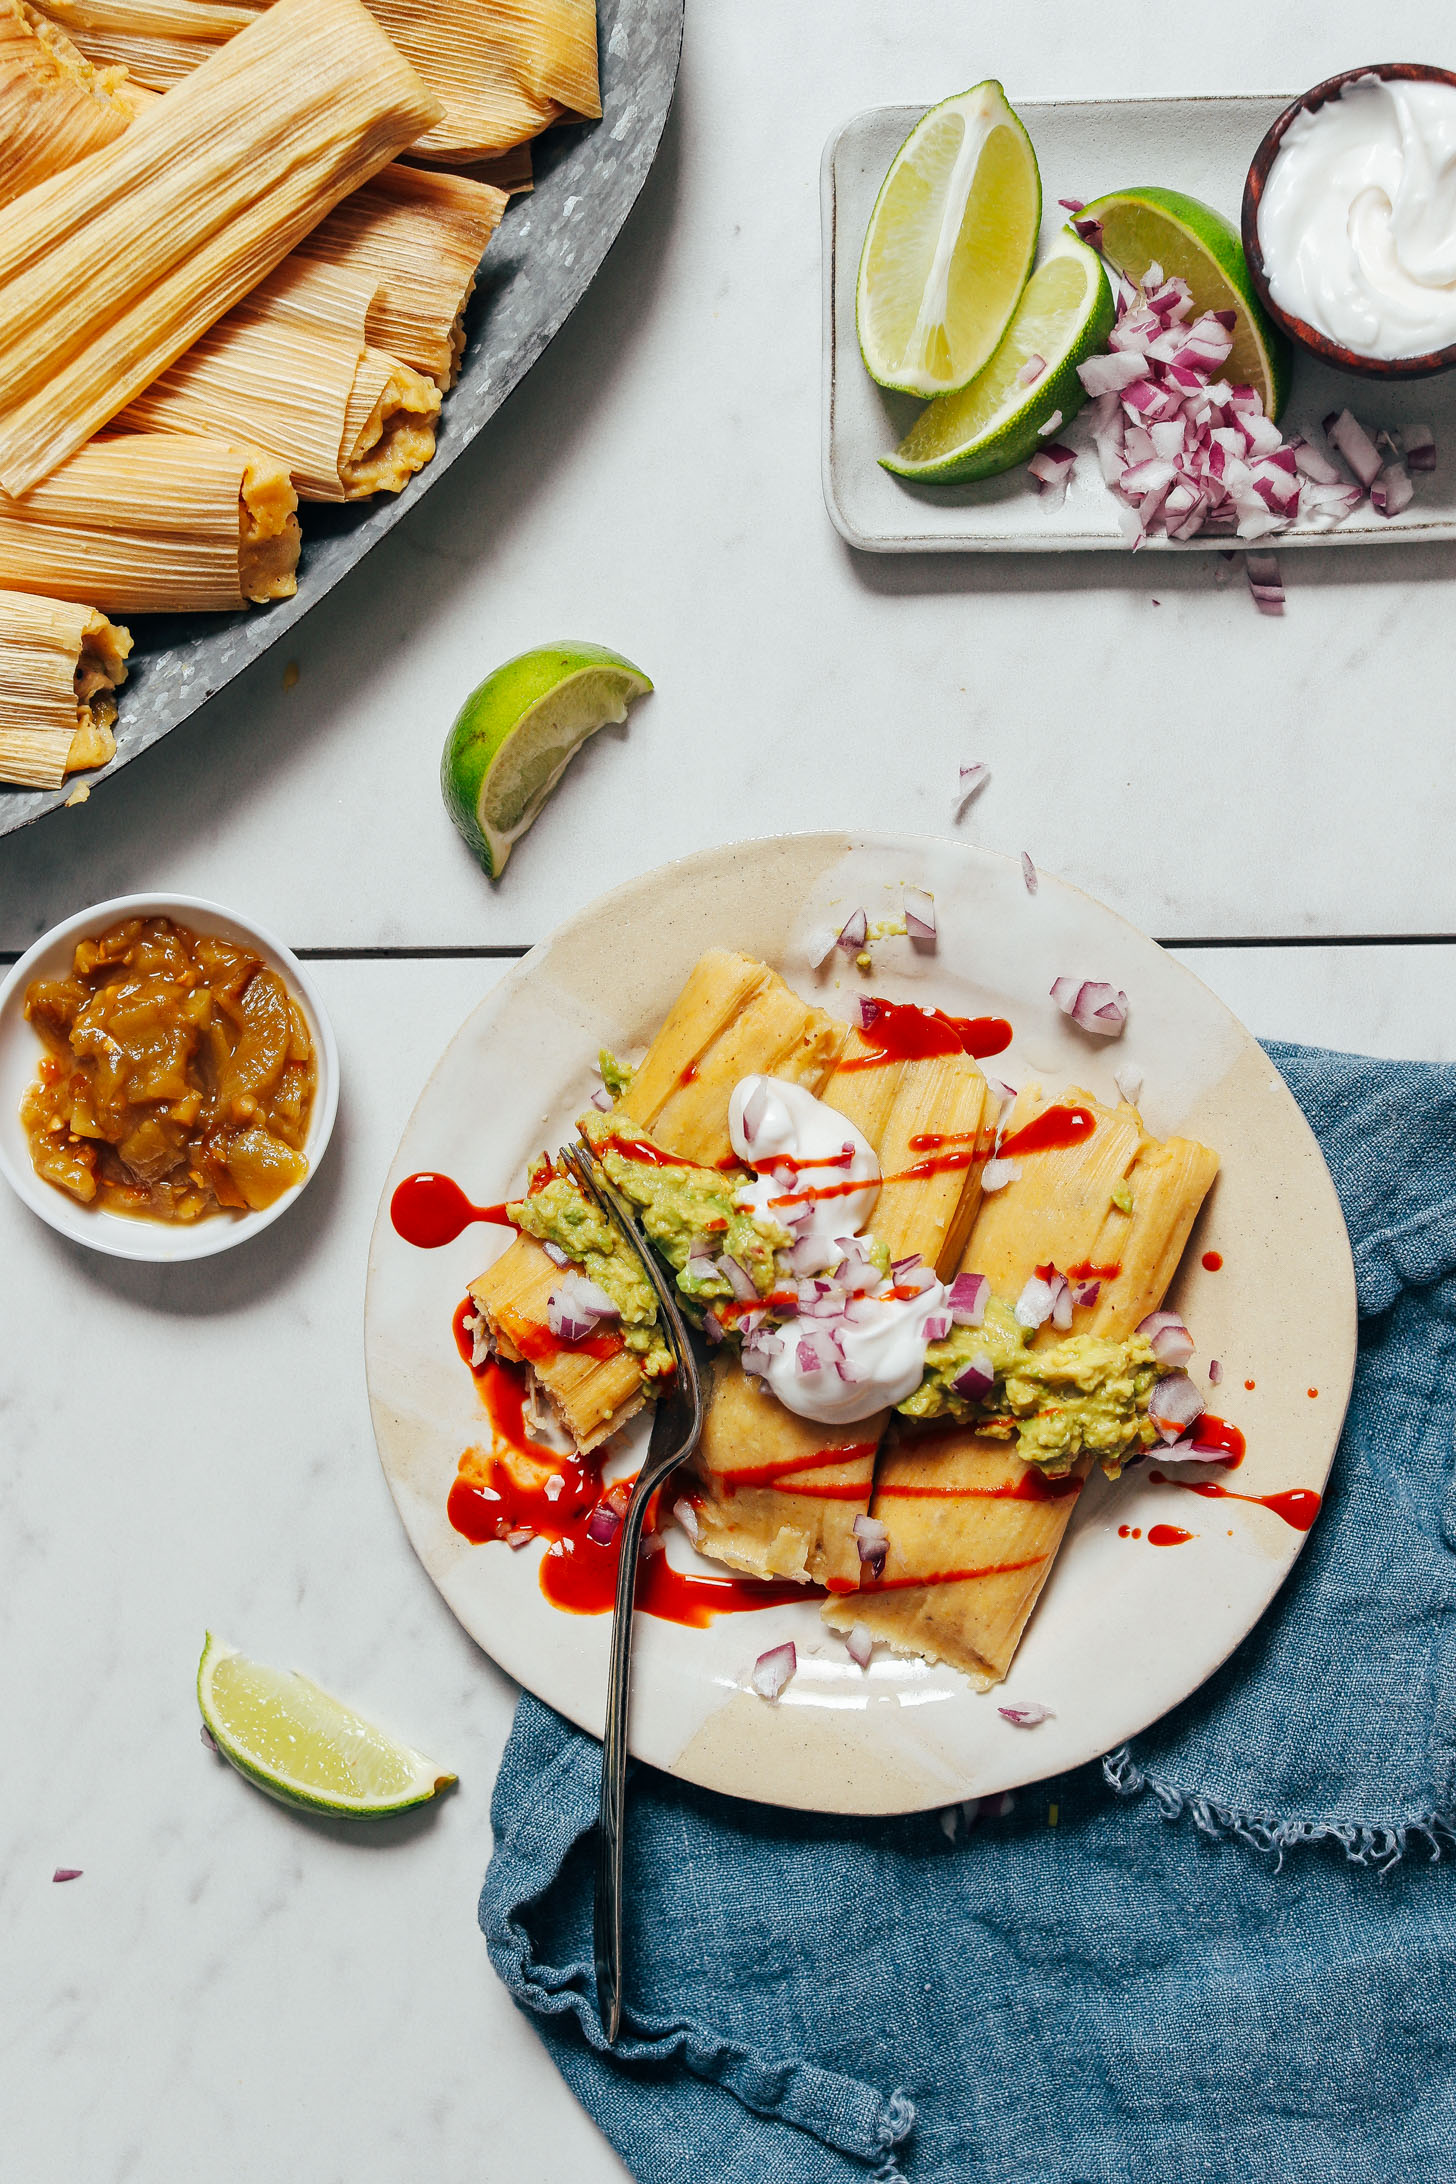 Fork cutting into tamales topped with guacamole, hot sauce, red onion, and sour cream